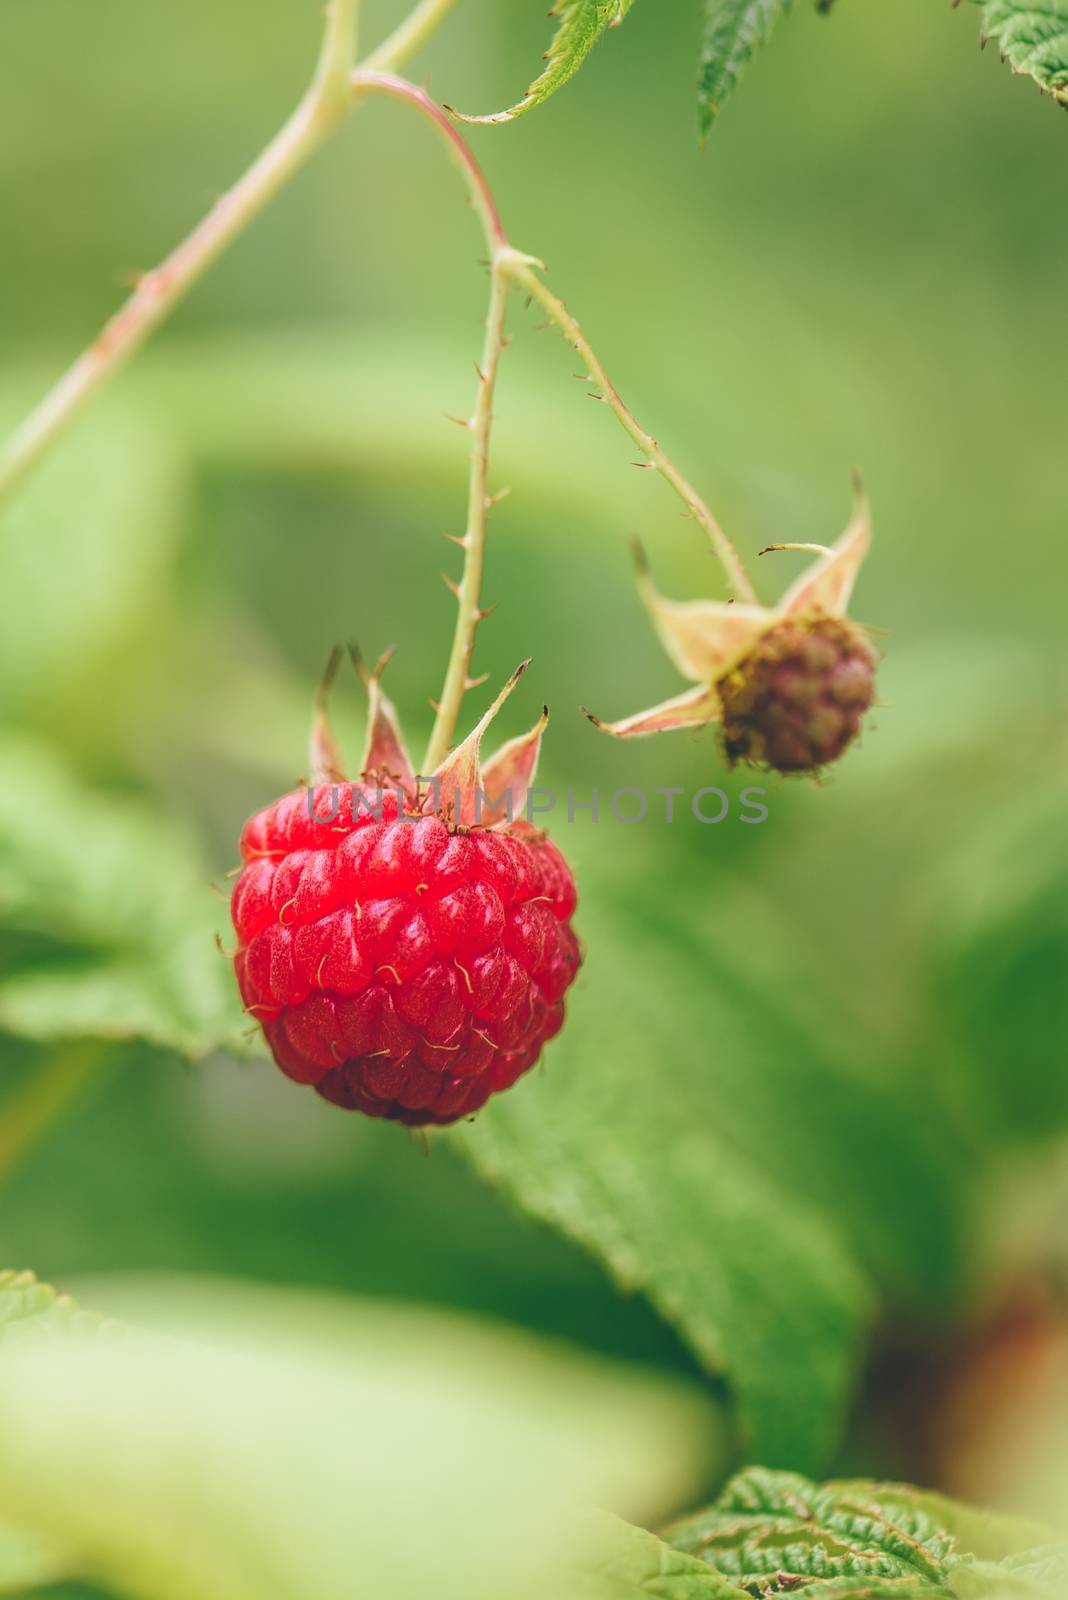 Ripe Raspberry with Green Leaves on a Branch on Blurred Background.